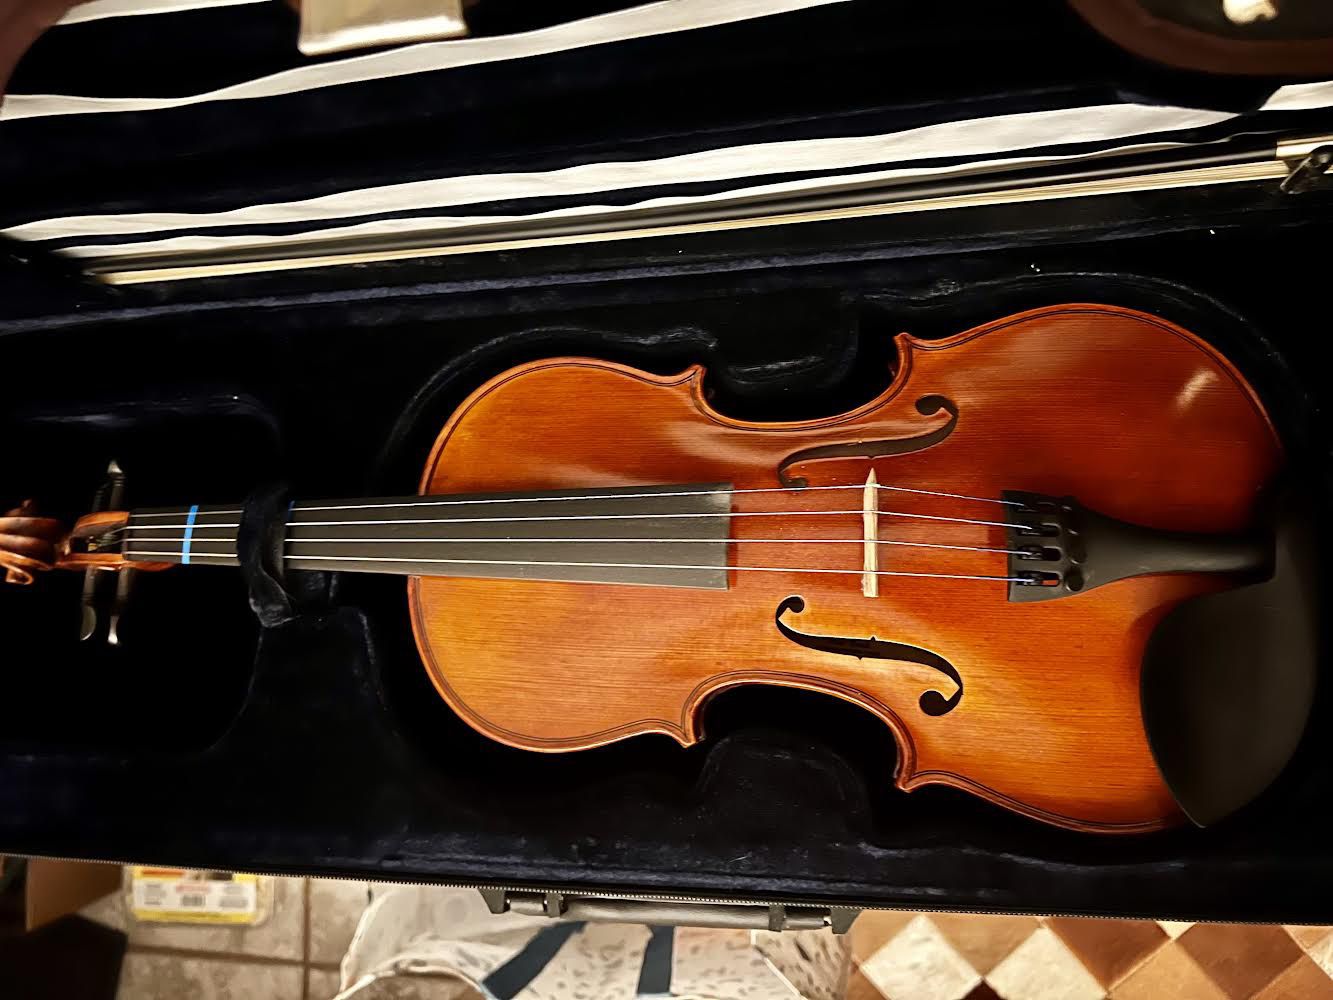 Full-sized Violin, Rarely Used